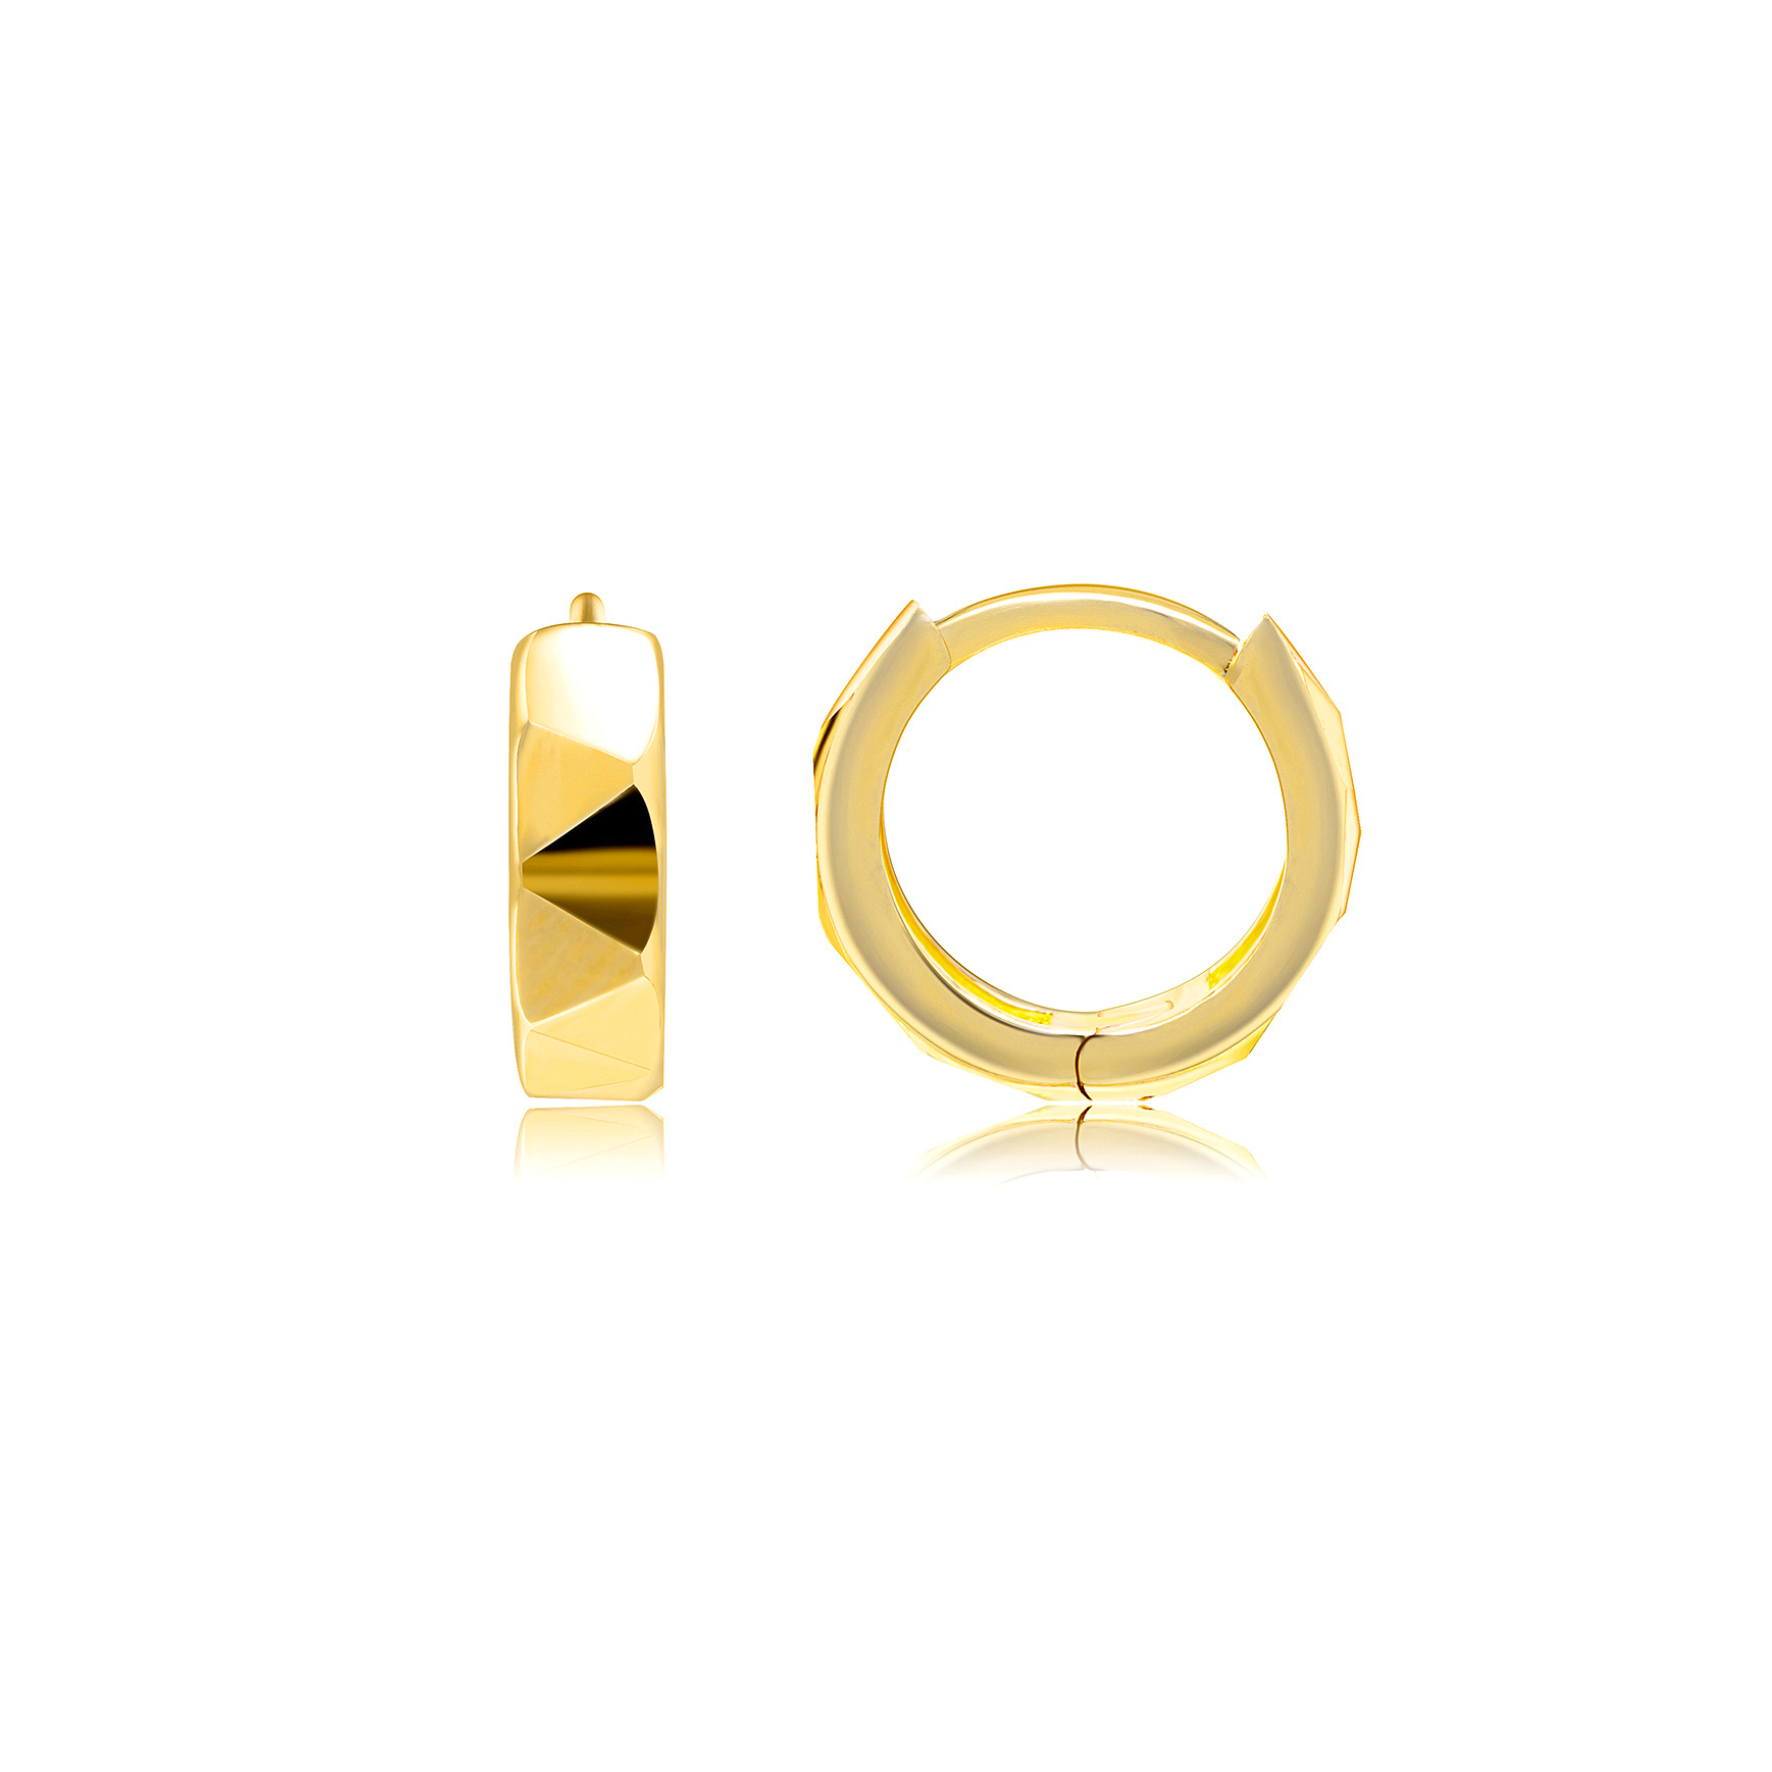 Caroline Chunky Hoops from A-Hjort Jewellery in Goldplated Silver Sterling 925